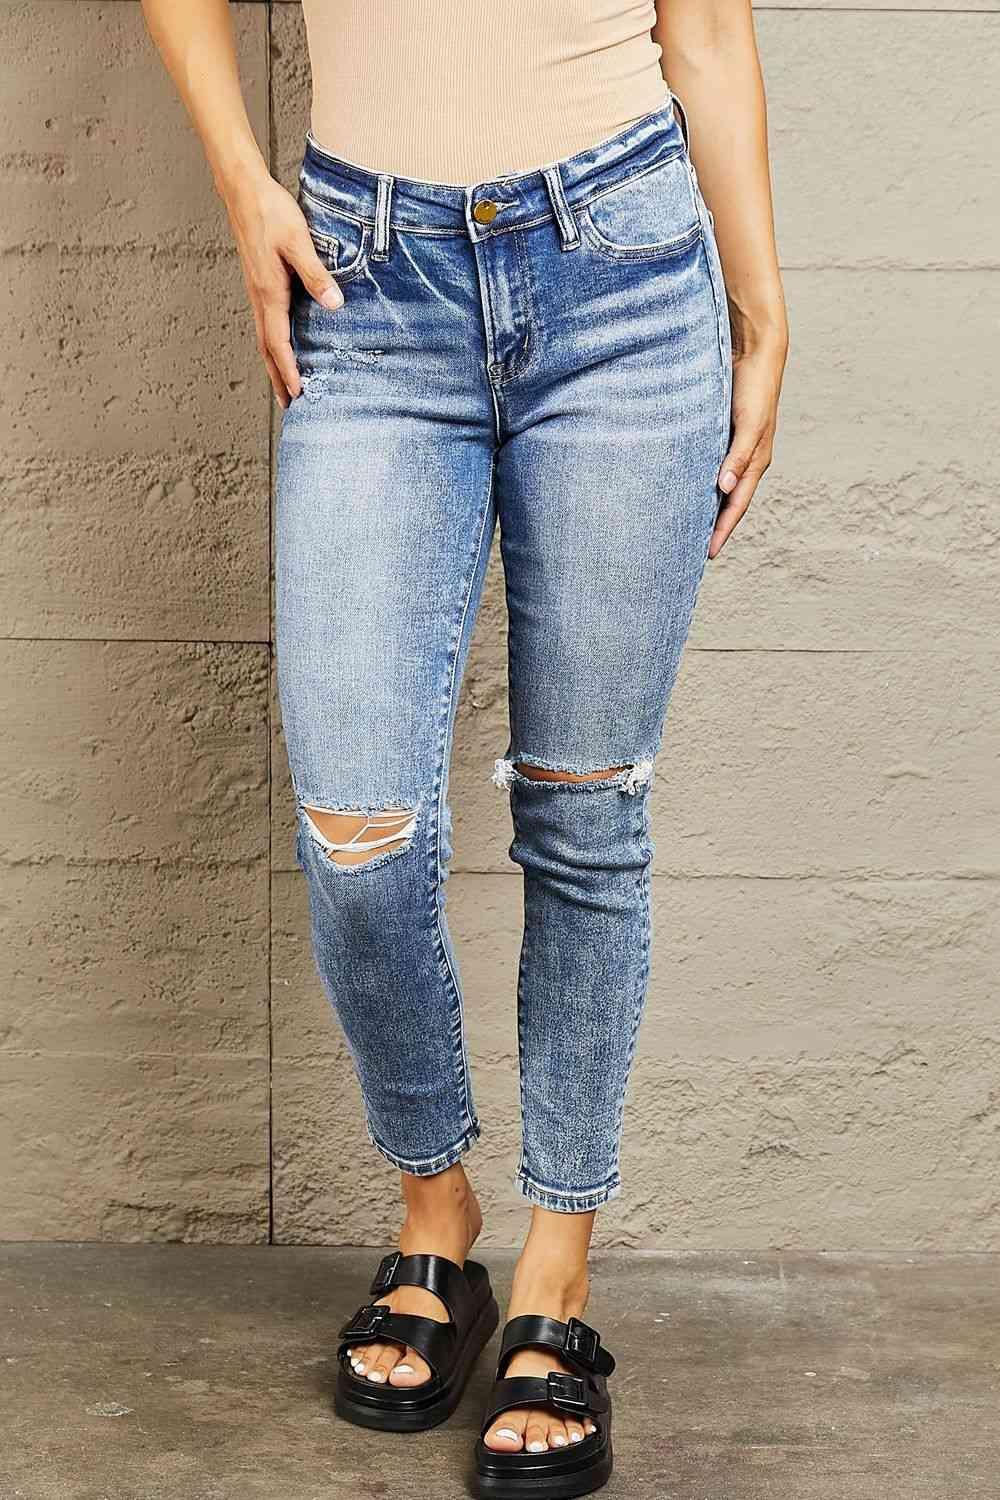 All Day Wear Cropped Ripped Skinny Jeans - MXSTUDIO.COM